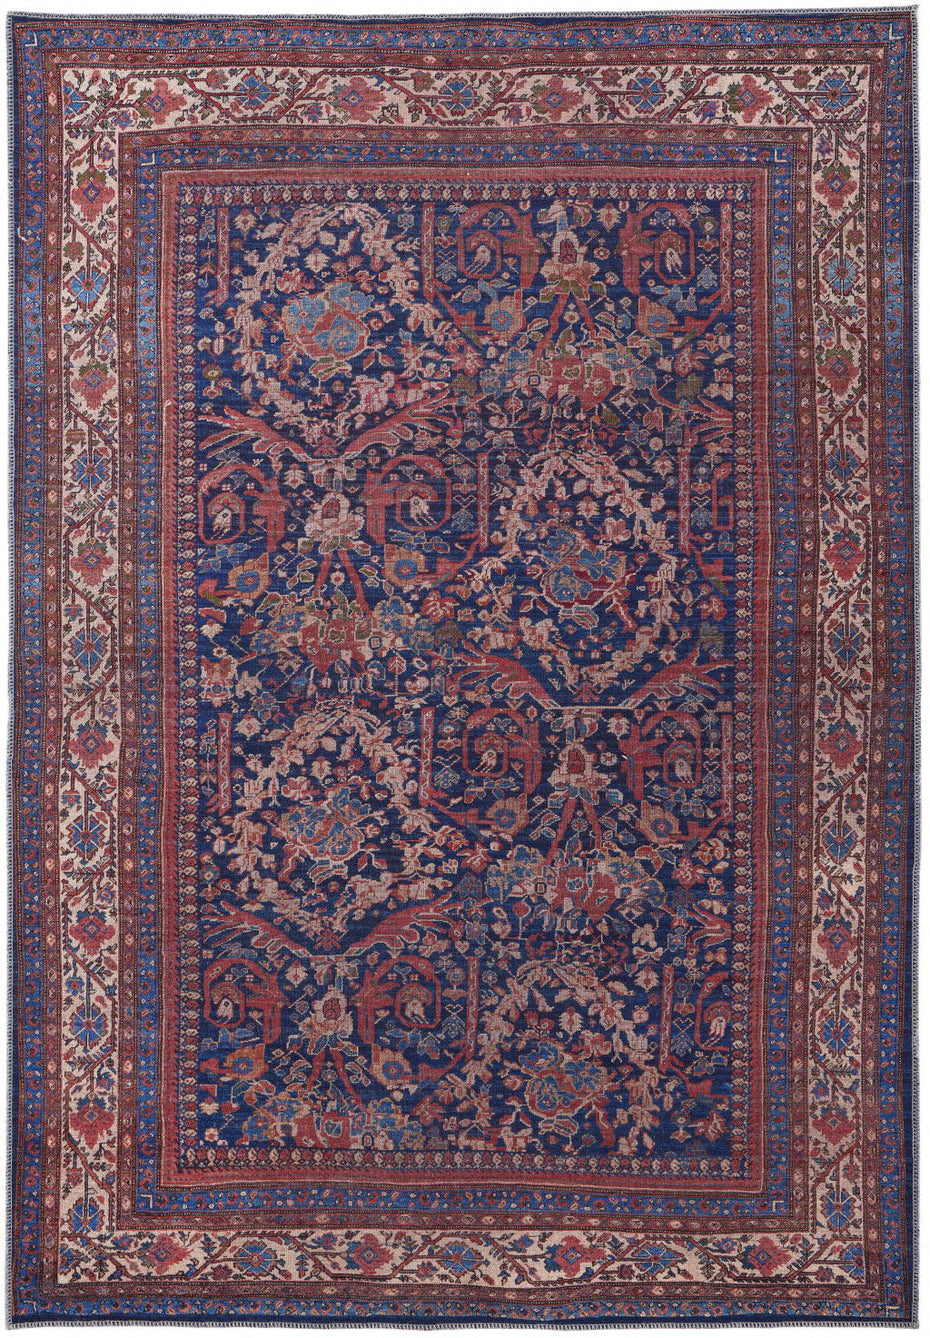 Floral Power Loom Area Rug - Red Blue And Tan - 2' X 3'